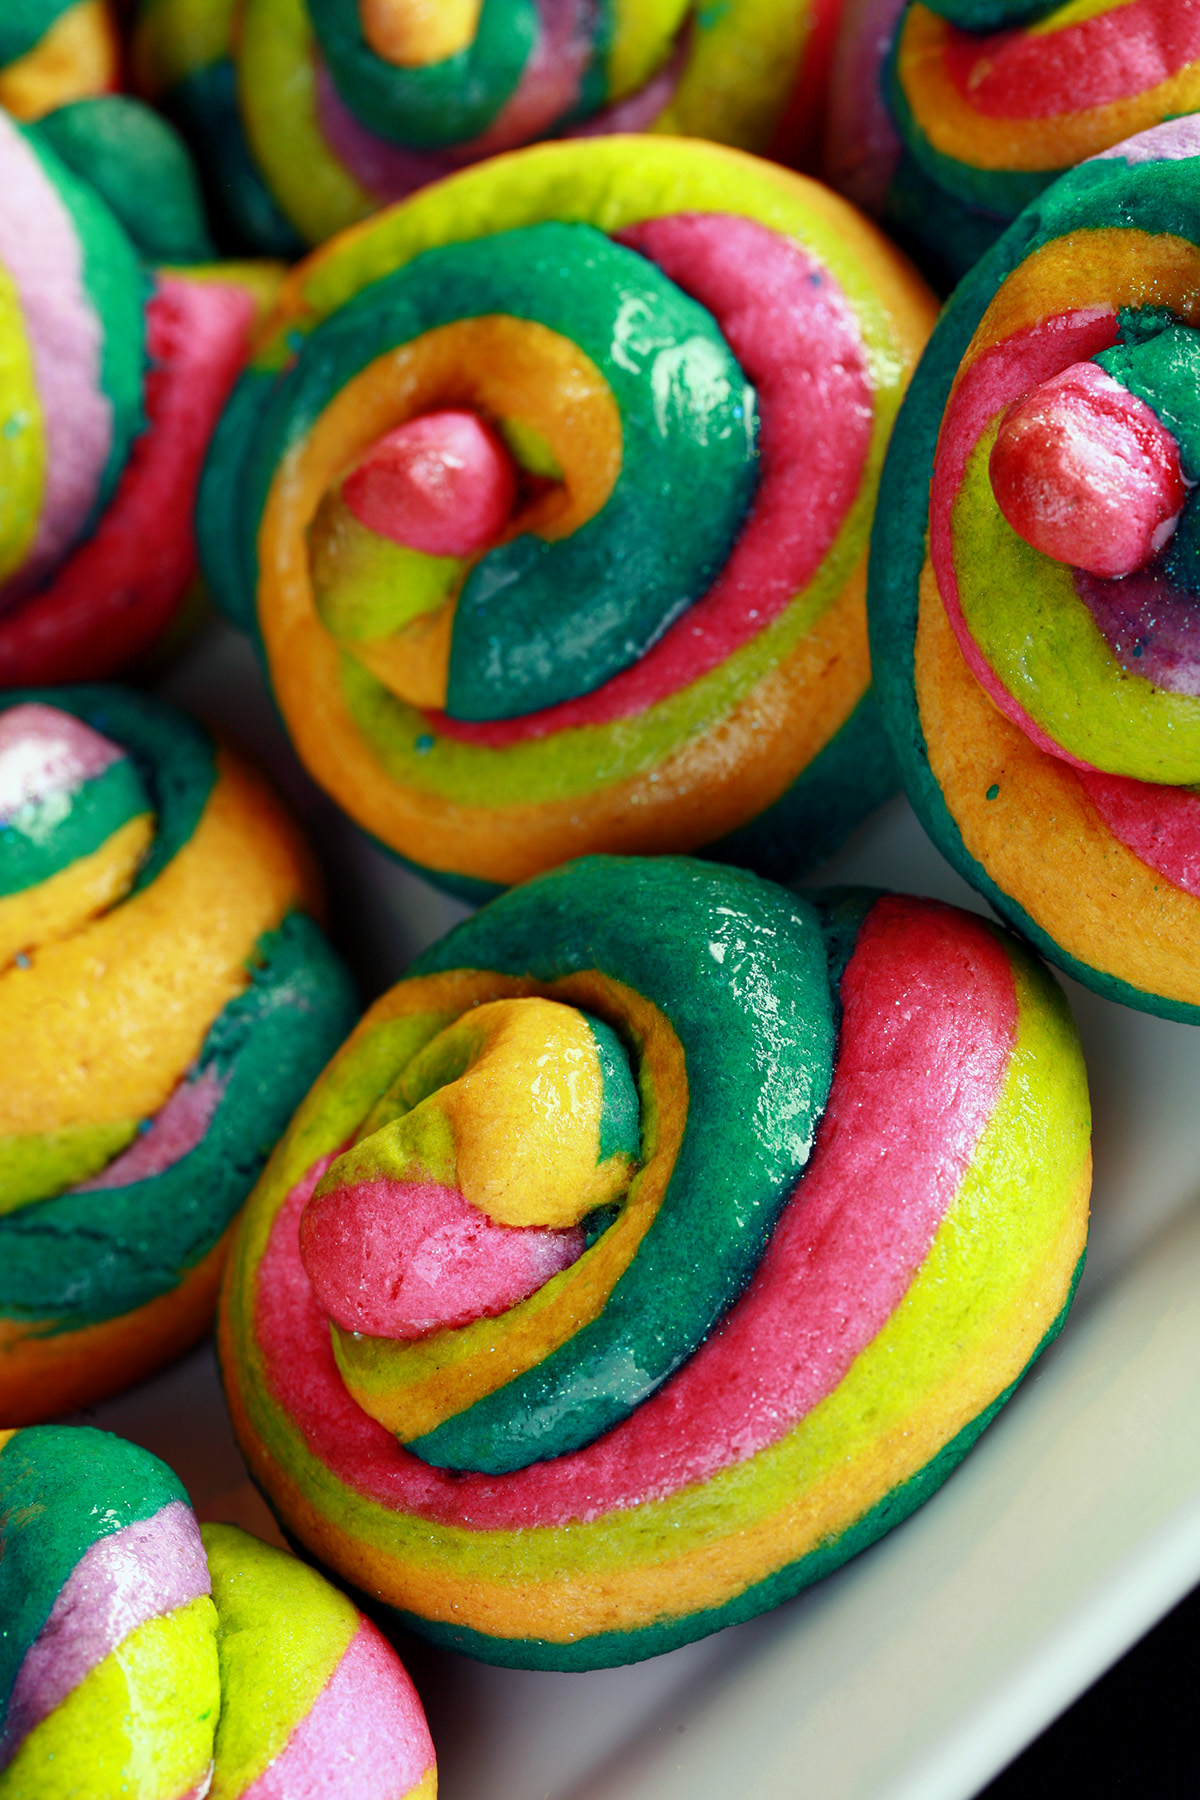 A close up view of a pile of gluten-free unicorn poop cookies.  They are brightly coloured cookie "poops" made from brightly coloured twists of cookie dough.